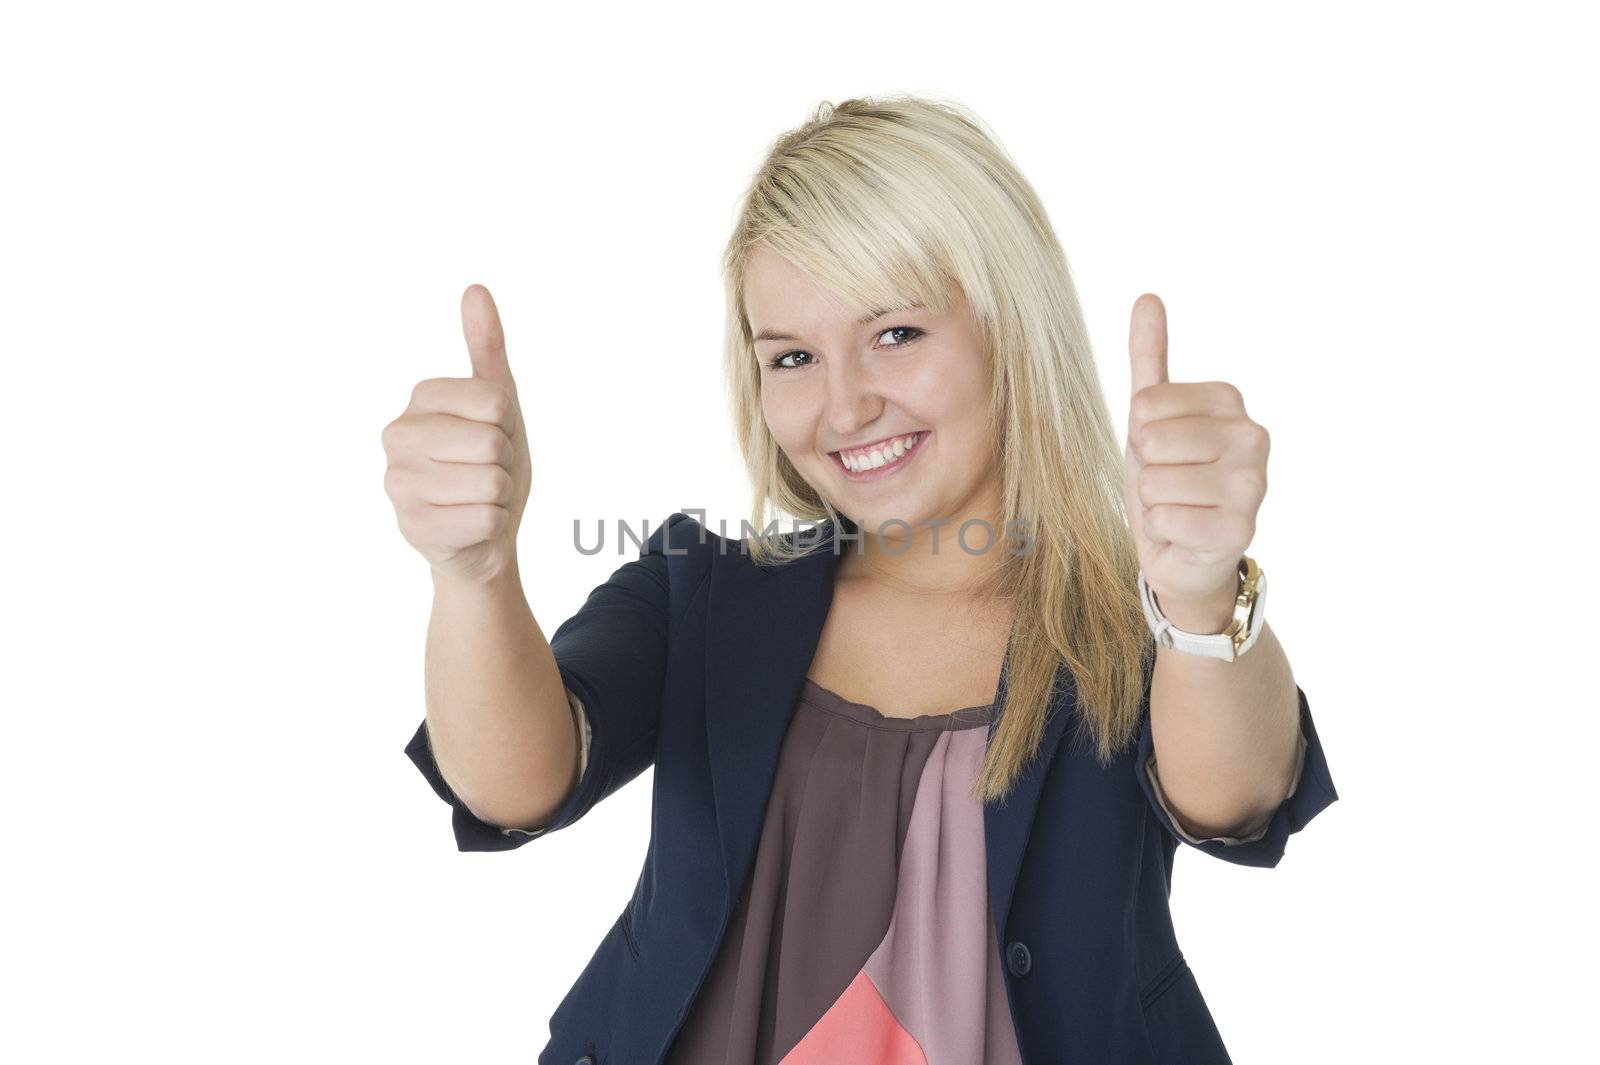 Motivated woman giving double thumbs up by MOELLERTHOMSEN